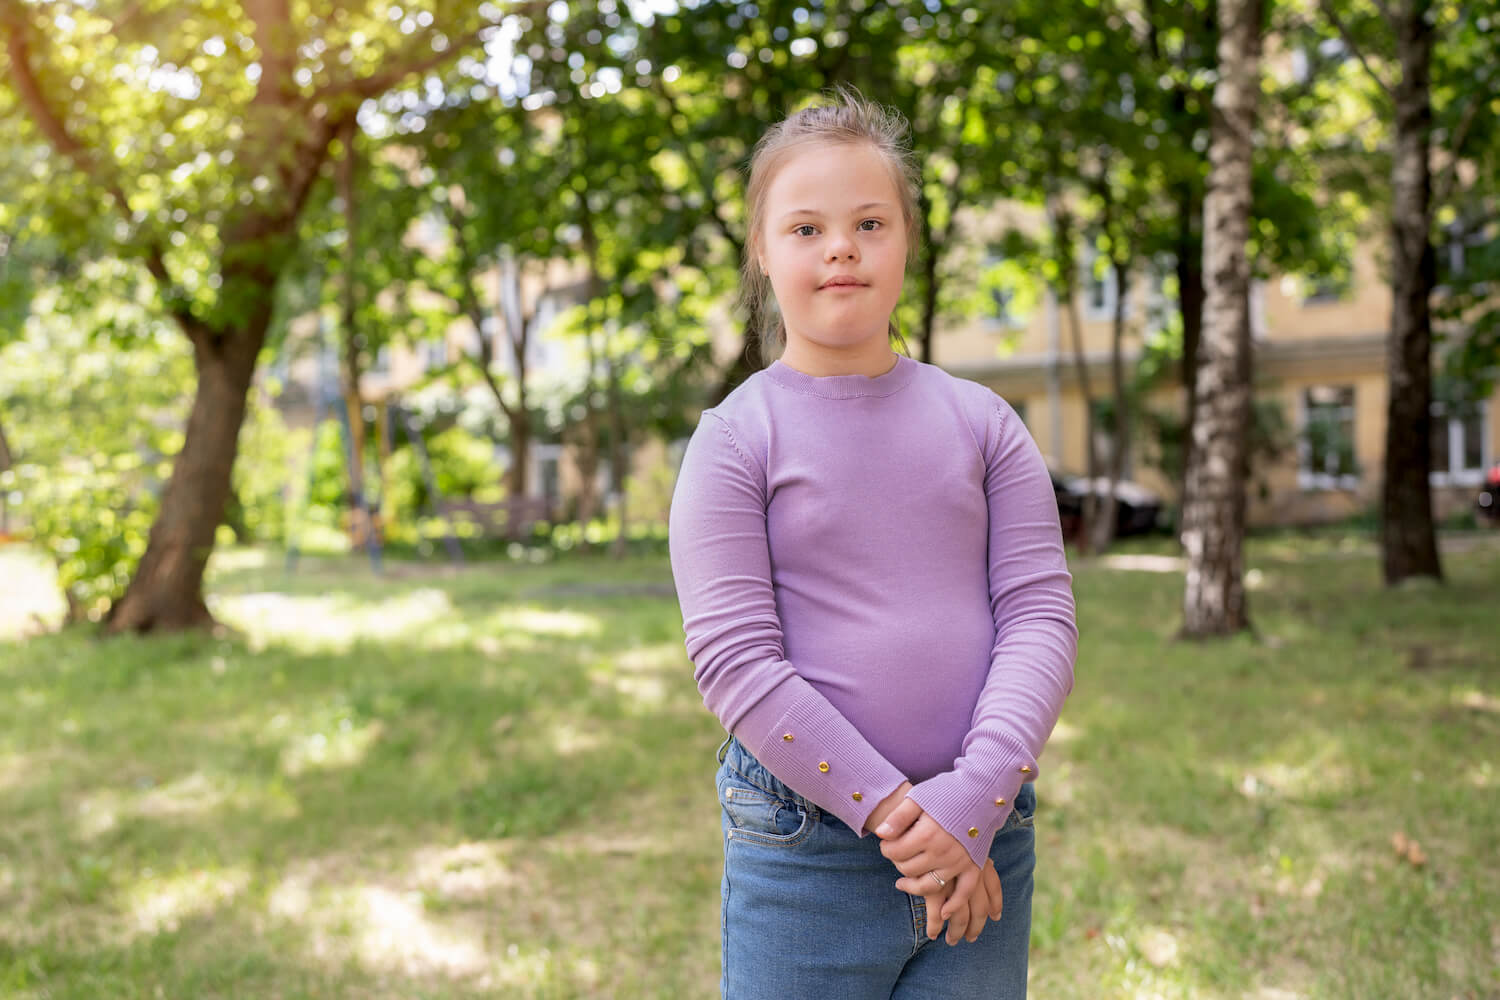 What is Fragile X Syndrome?